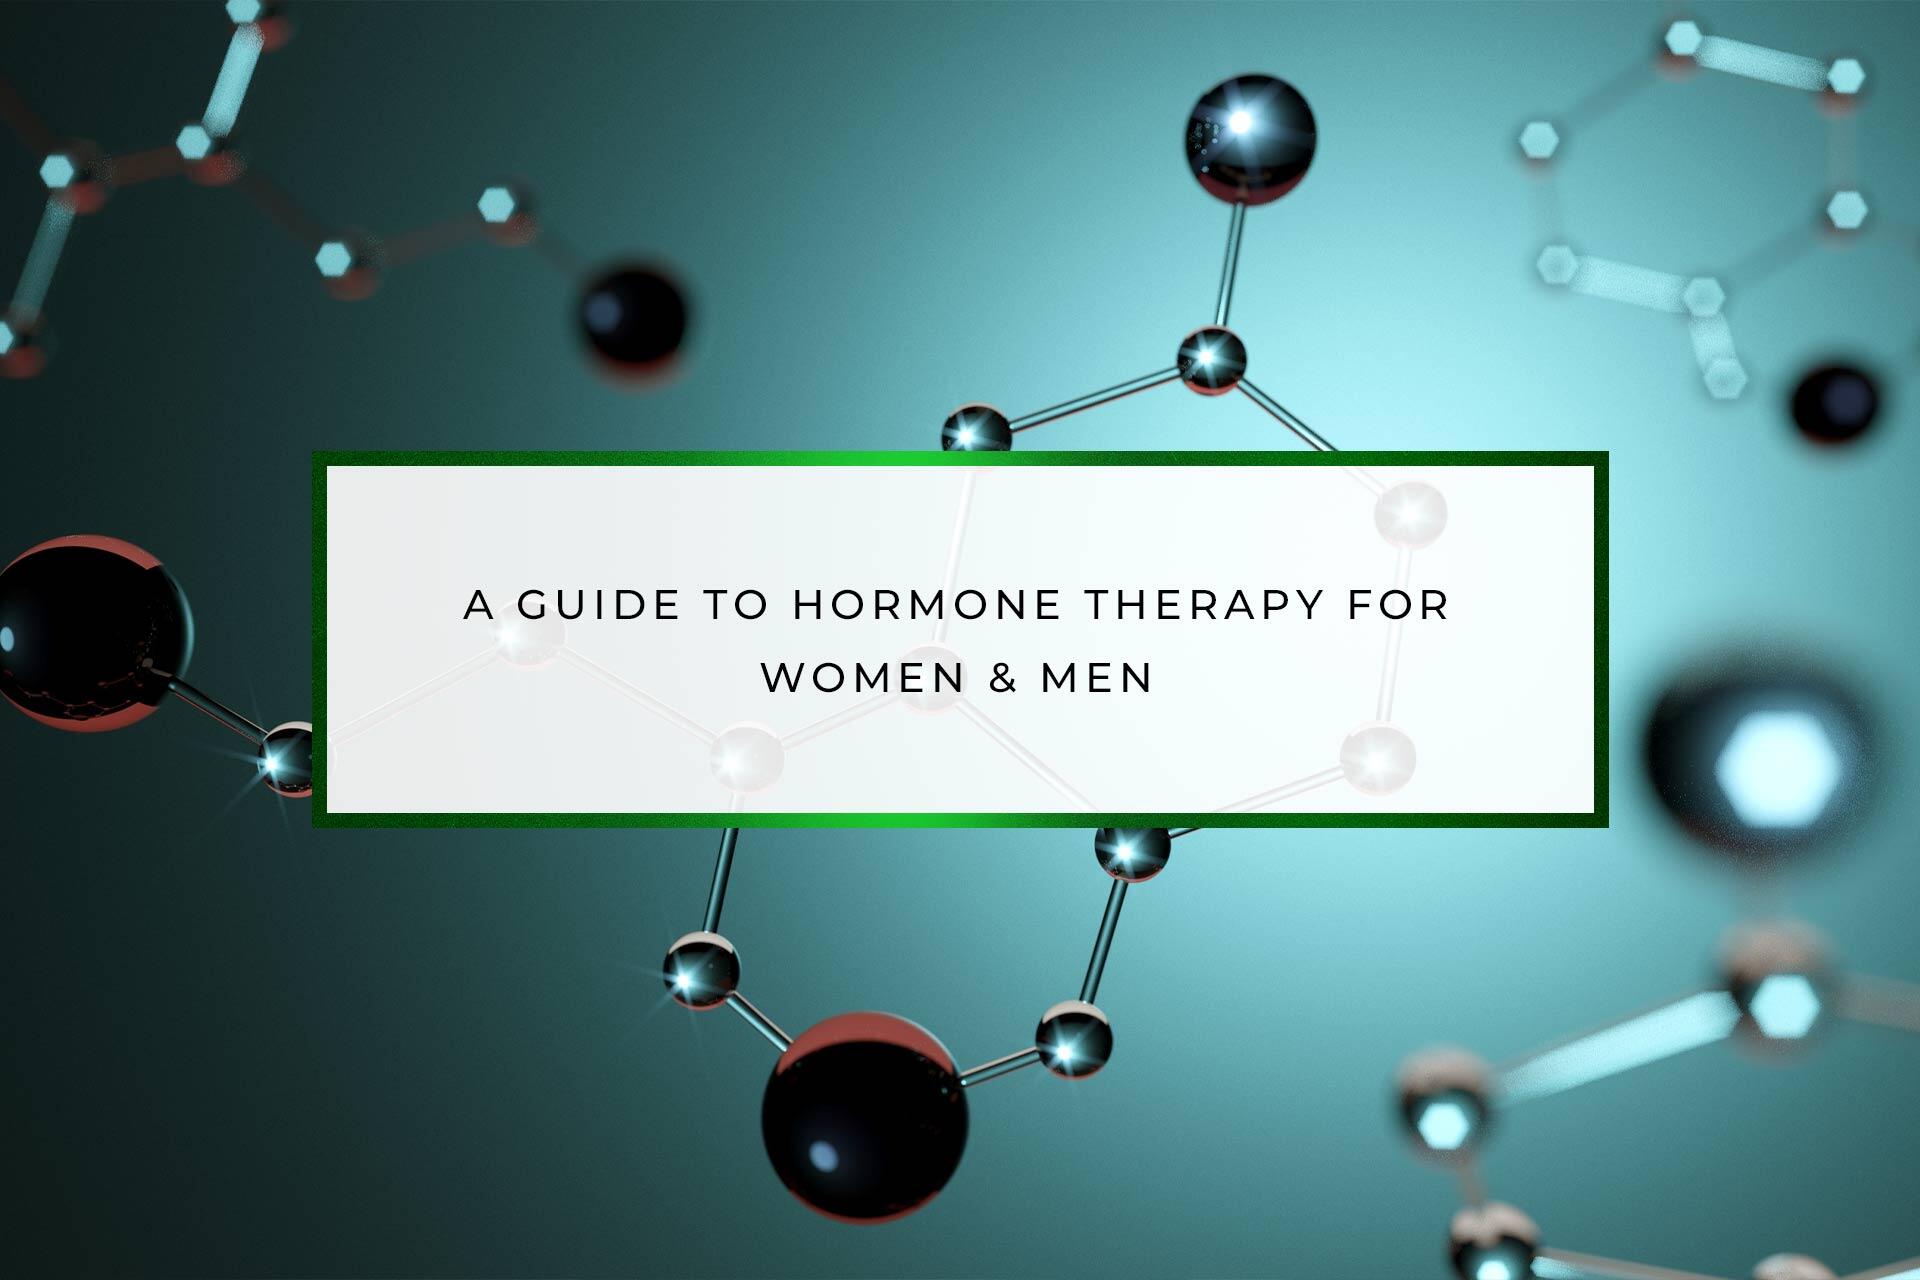 A Guide to Hormone Therapy for Women & Men